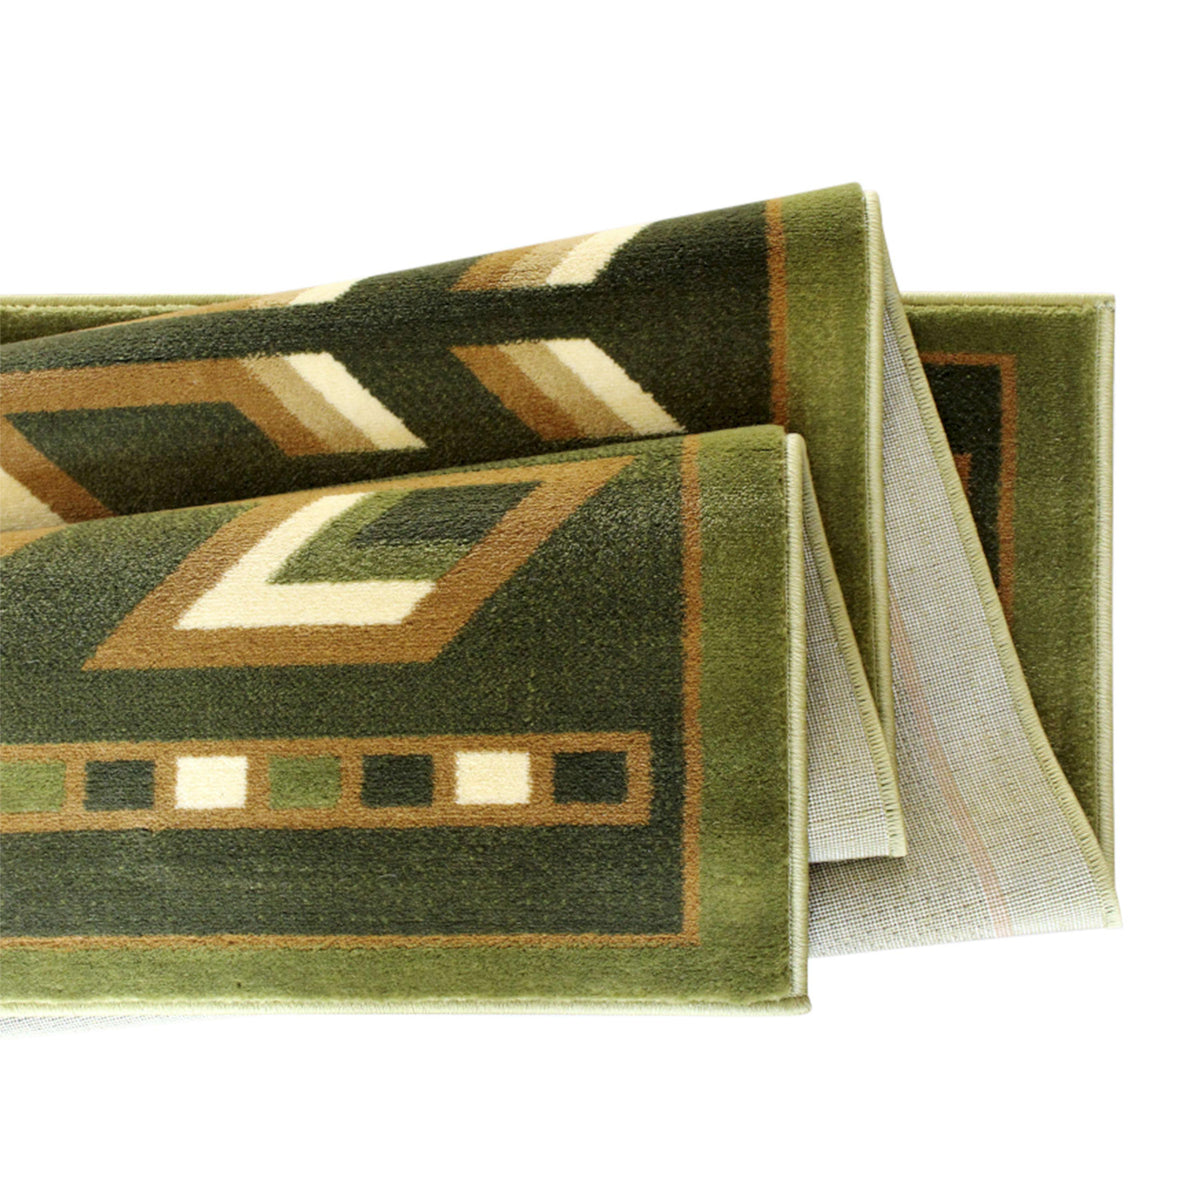 Green,5' x 7' |#| Multipurpose Southwestern Style Patterned Indoor Area Rug - Green - 5' x 7'